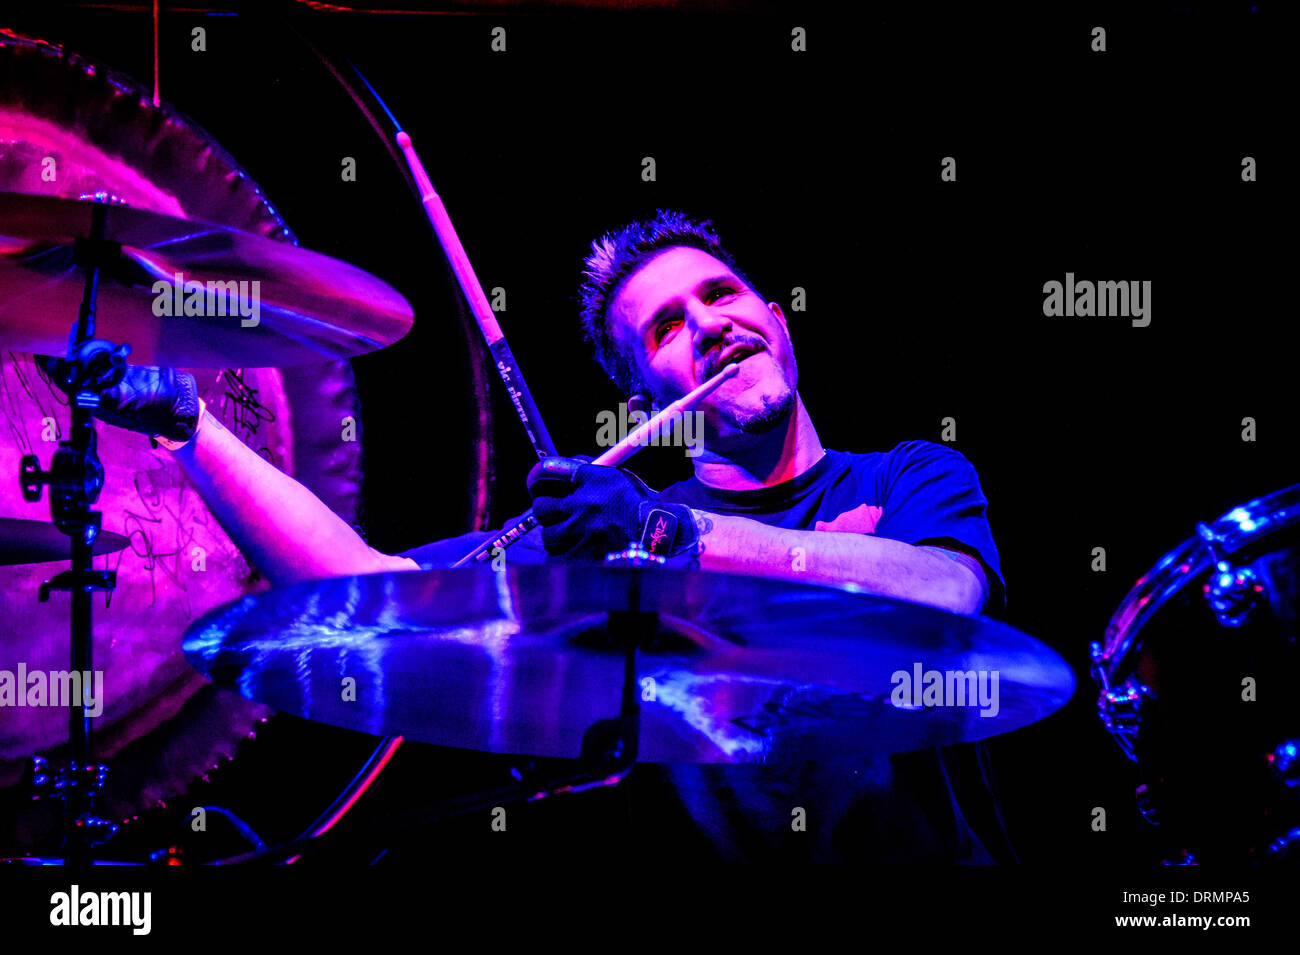 Toronto, Ontario, Canada. 24th Jan, 2014. CHARLES LEE 'CHARLIE' BENANTE (Anthrax). The Bonzo Bash, it is the ultimate celebration for the ultimate drummer, John Henry Bonham of Led Zeppelin. It is presented by Natal and Marshall and is a night filled with amazing drummers playing their favorite Led Zeppelin song. It is a complete evening of Led Zeppelin jams and this year was a crazy one! It was be hosted by Mike Portnoy, Carmine Appice and the show creator, Brian Tichy at The Observatory club in Santa Ana, CA. © Igor Vidyashev/ZUMAPRESS.com/Alamy Live News Stock Photo